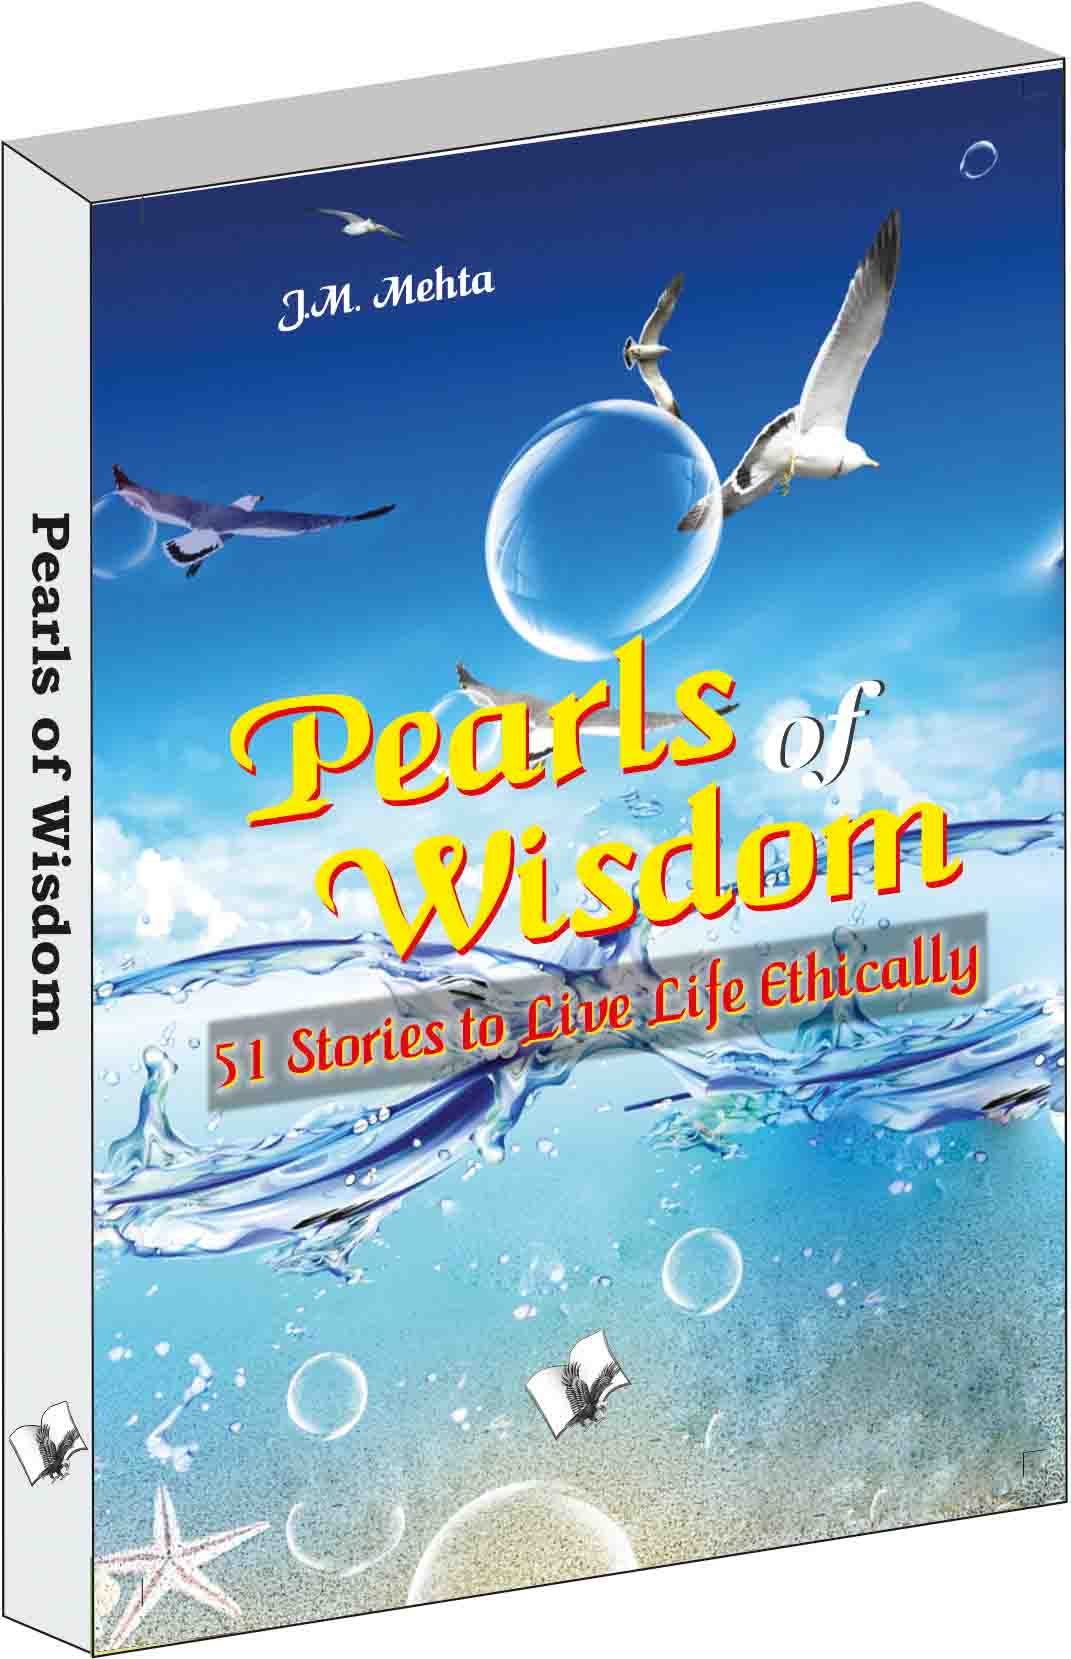 Pearls of Wisdom-51 Stories to Live Life Ethically